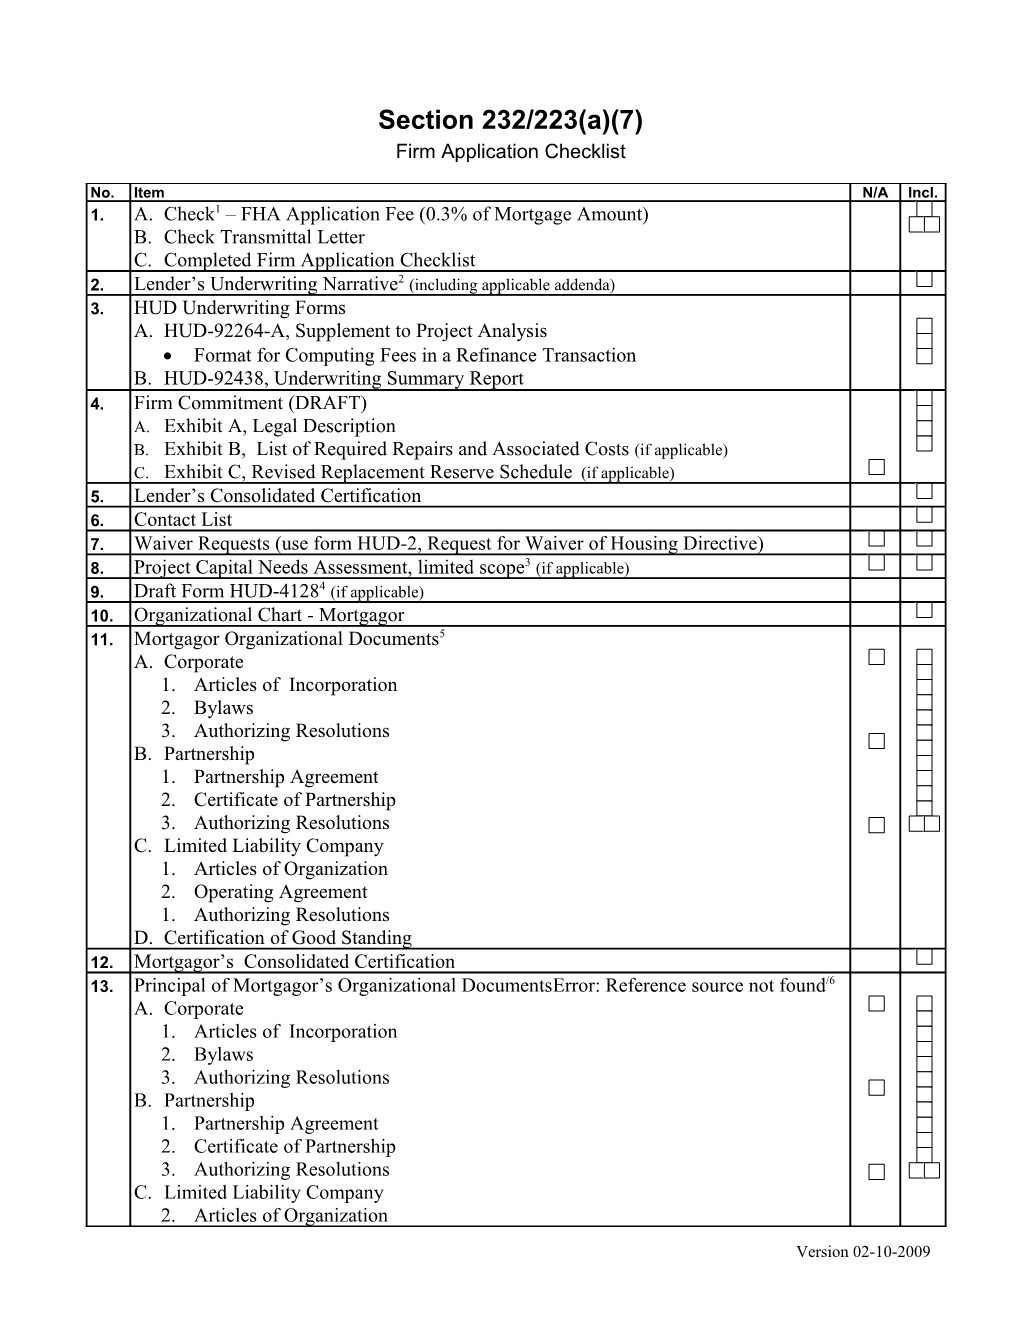 Section 232/223(A)(7) Firm Application Checklist